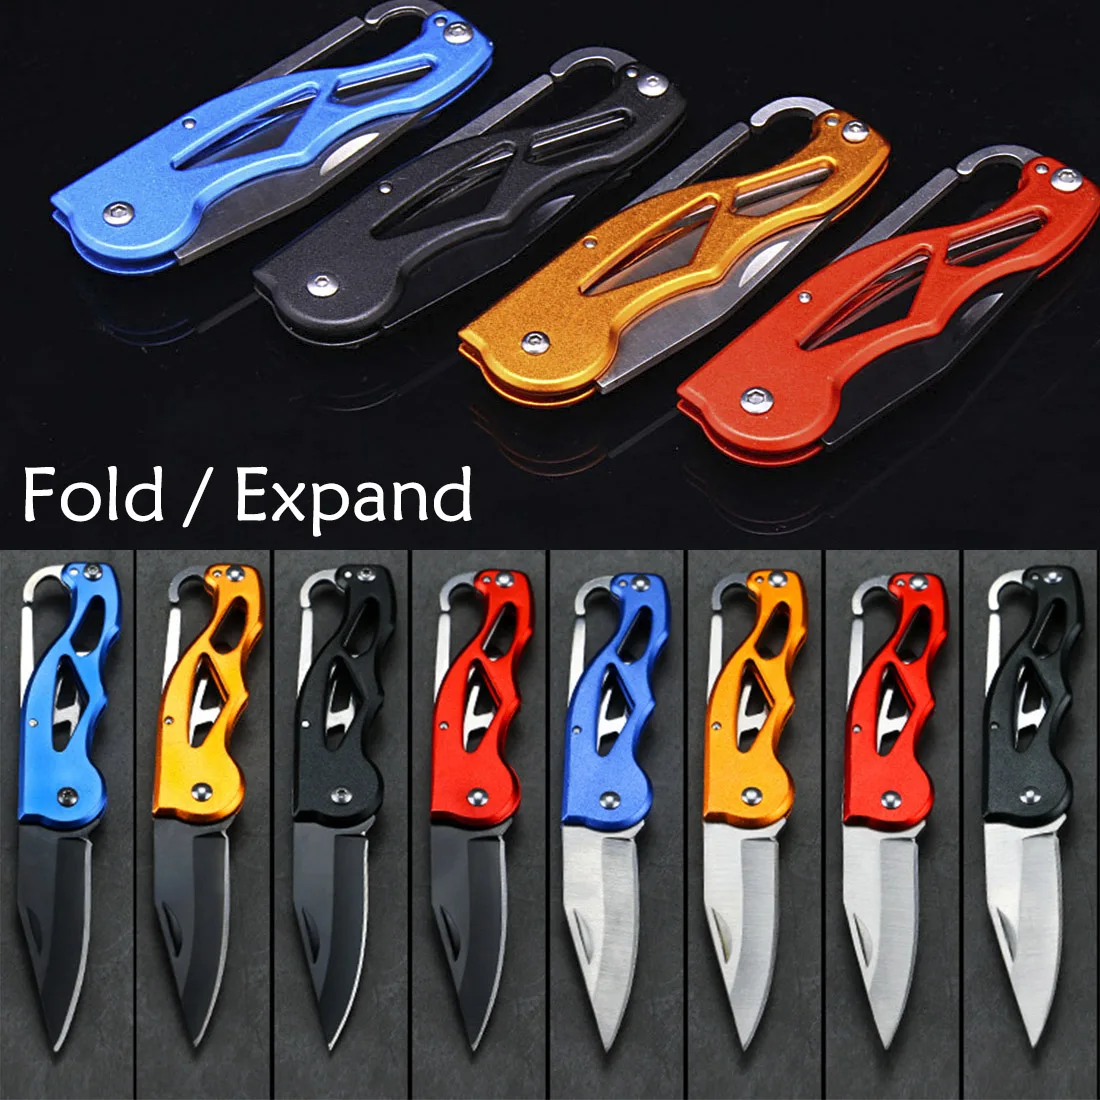 

Multifunction Folding Fold Knife Portable Key Ring Camping Mini Peeler Keychain Tactical Rescue Survival Outdoor Tool Hunting